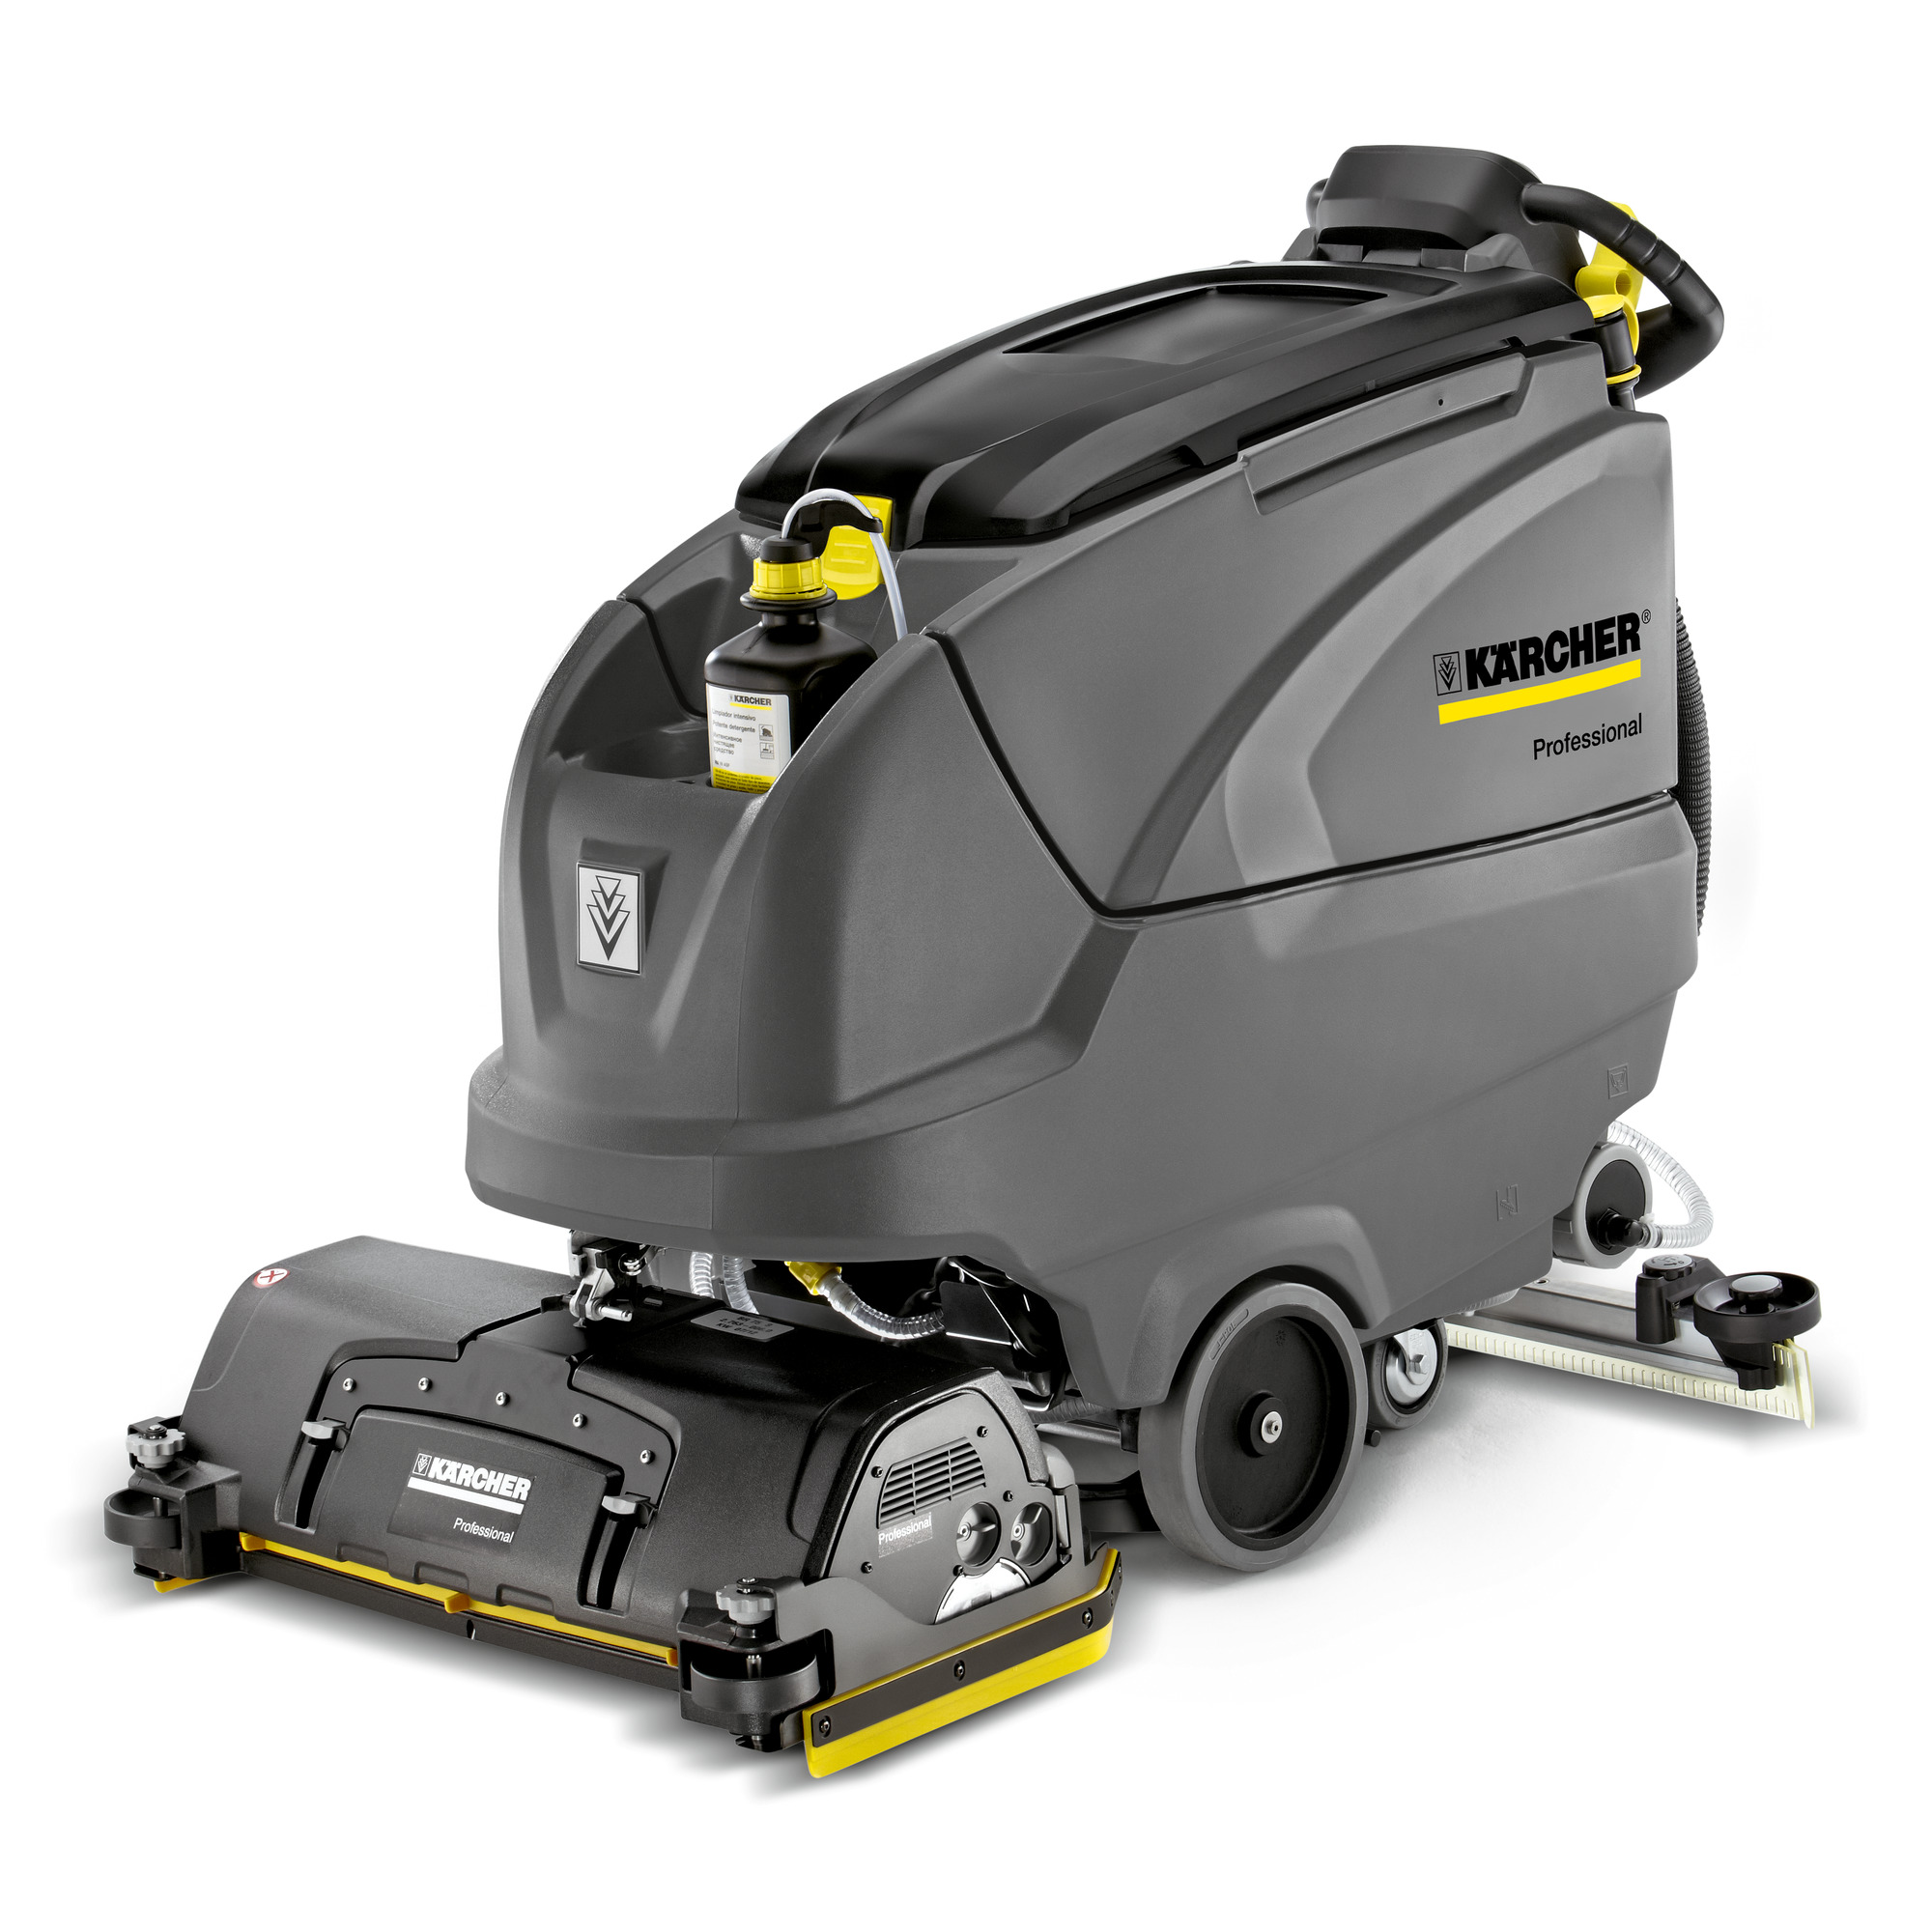 B 80 W BP, 21 GAL, NO
BATTERIES, W/ CURVED
SQUEEGEE, R65 BRUSH HEAD,
AUTOMATIC FLOOR SCRUBBER